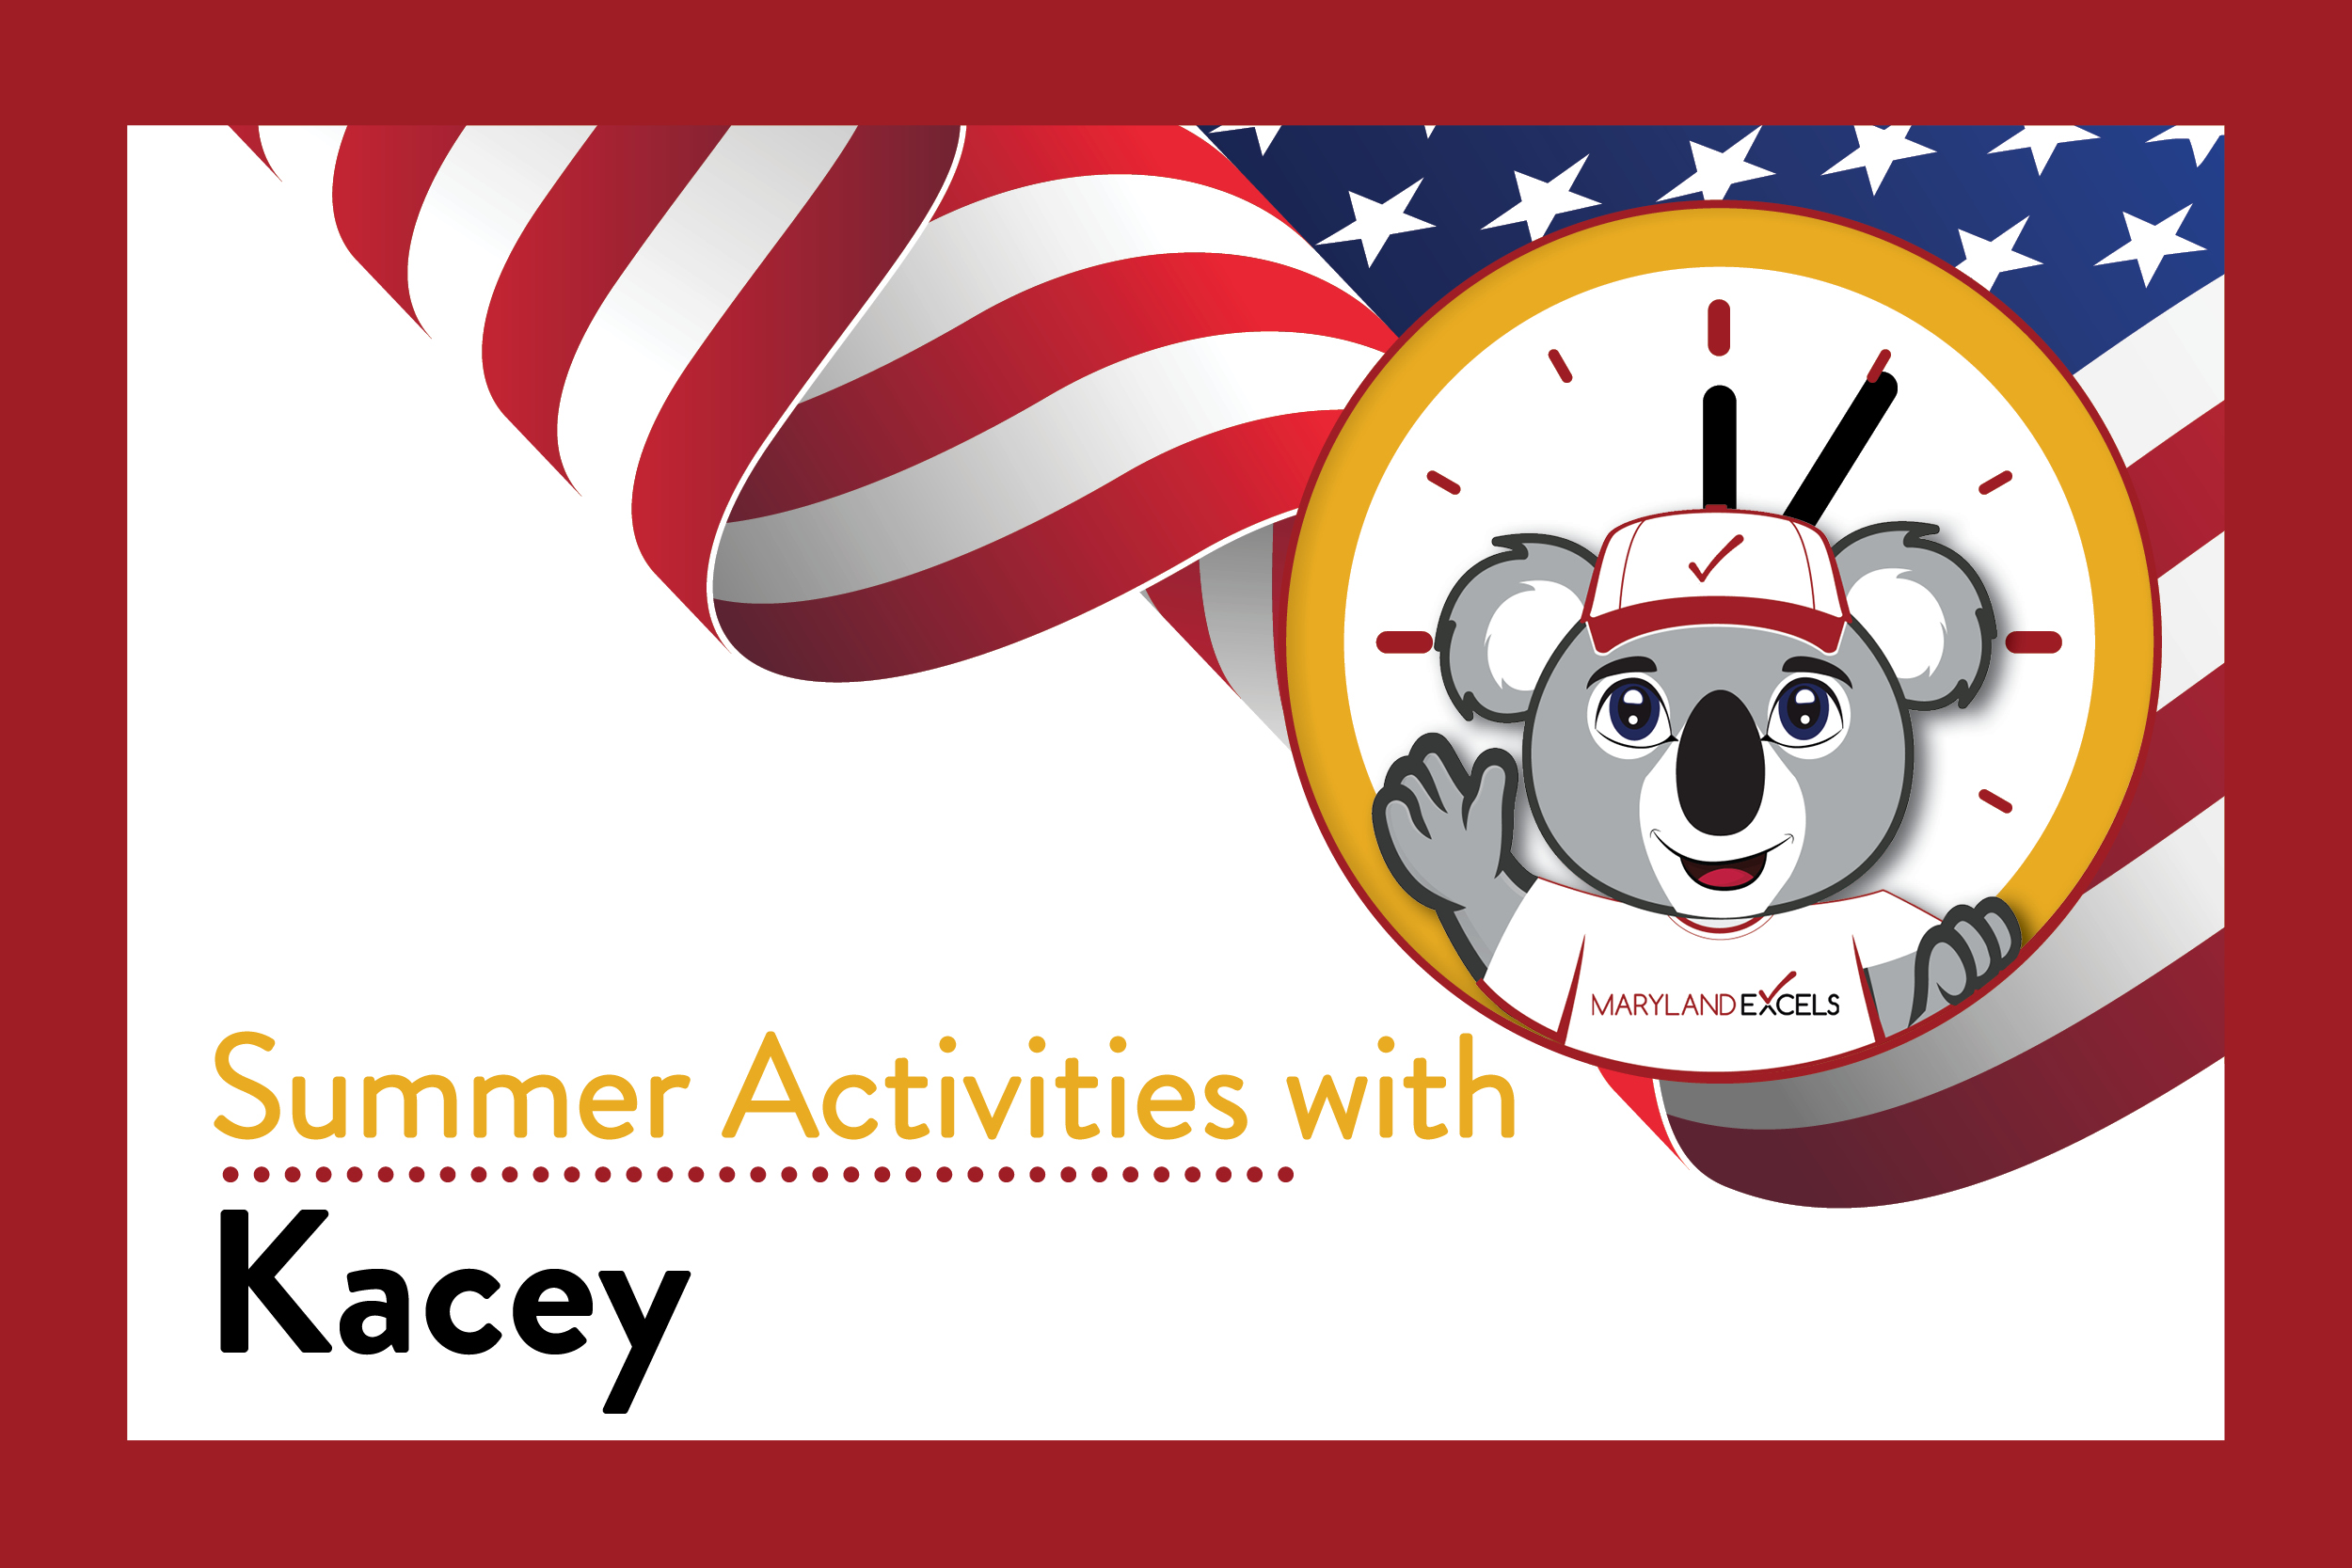 Summer activities with Kacey, with Kacey the Koala and an American flag